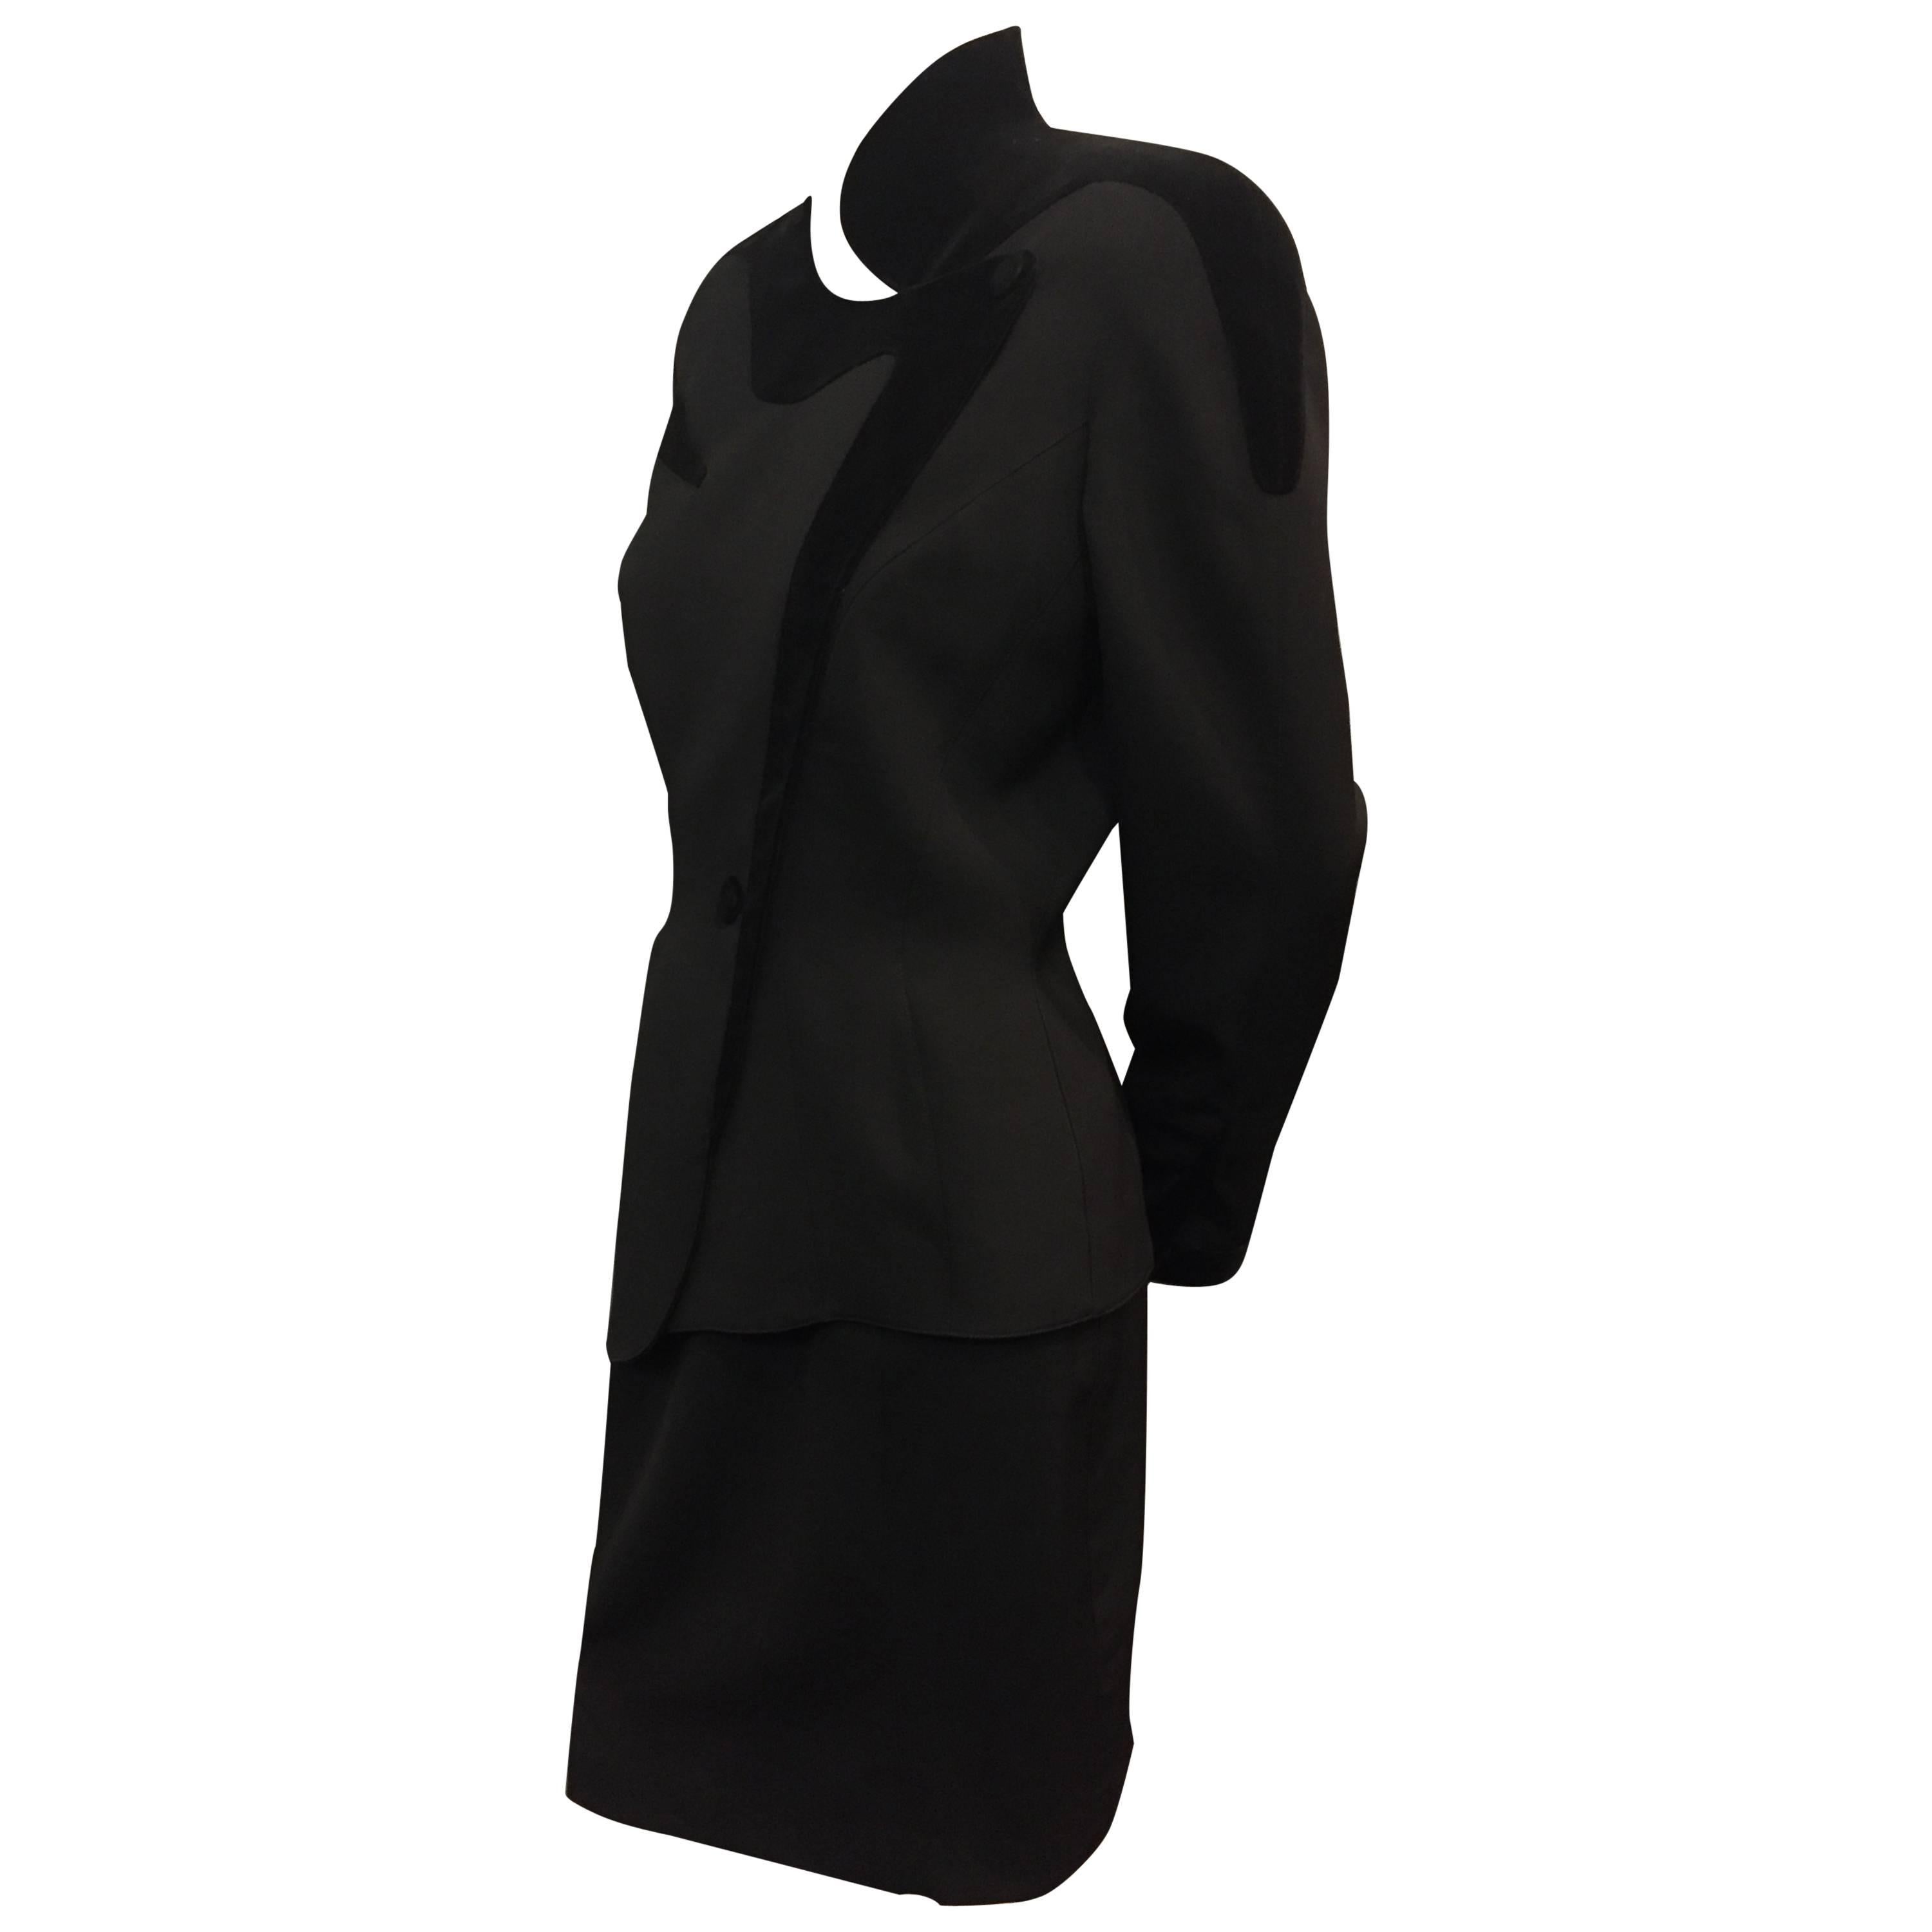 1980s Thierry Mugler Iconic Wasp-Waist Black Wool and Velvet Asymmetrical Suit